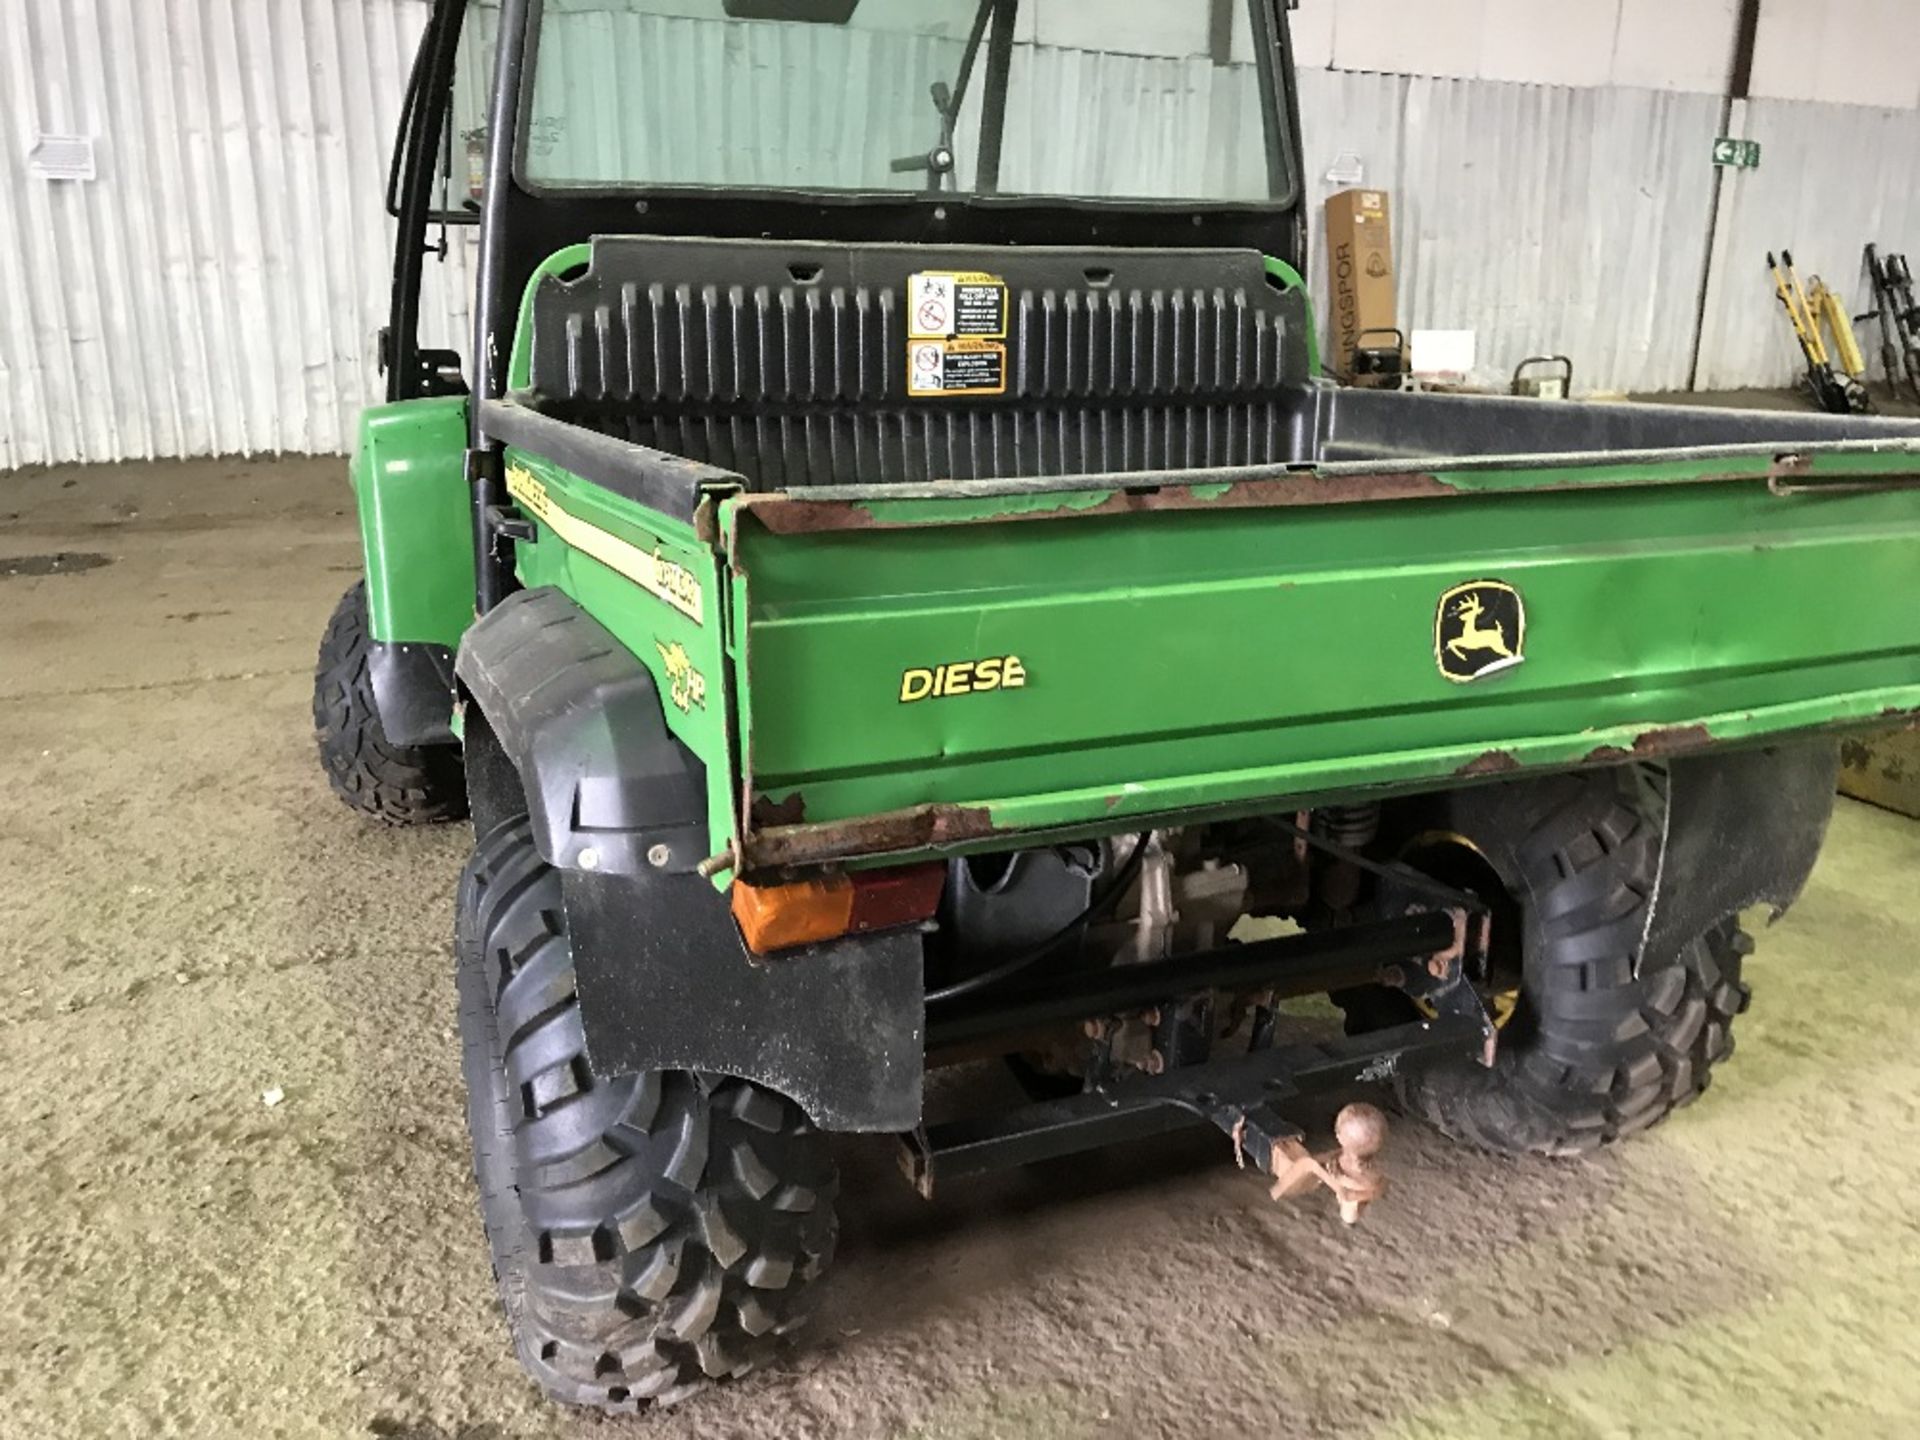 John Deere diesel Gator, yr2007 approx. WHEN TESTED WAS SEEN TO RUN AND DRIVE..SEE VIDEO - Image 3 of 3